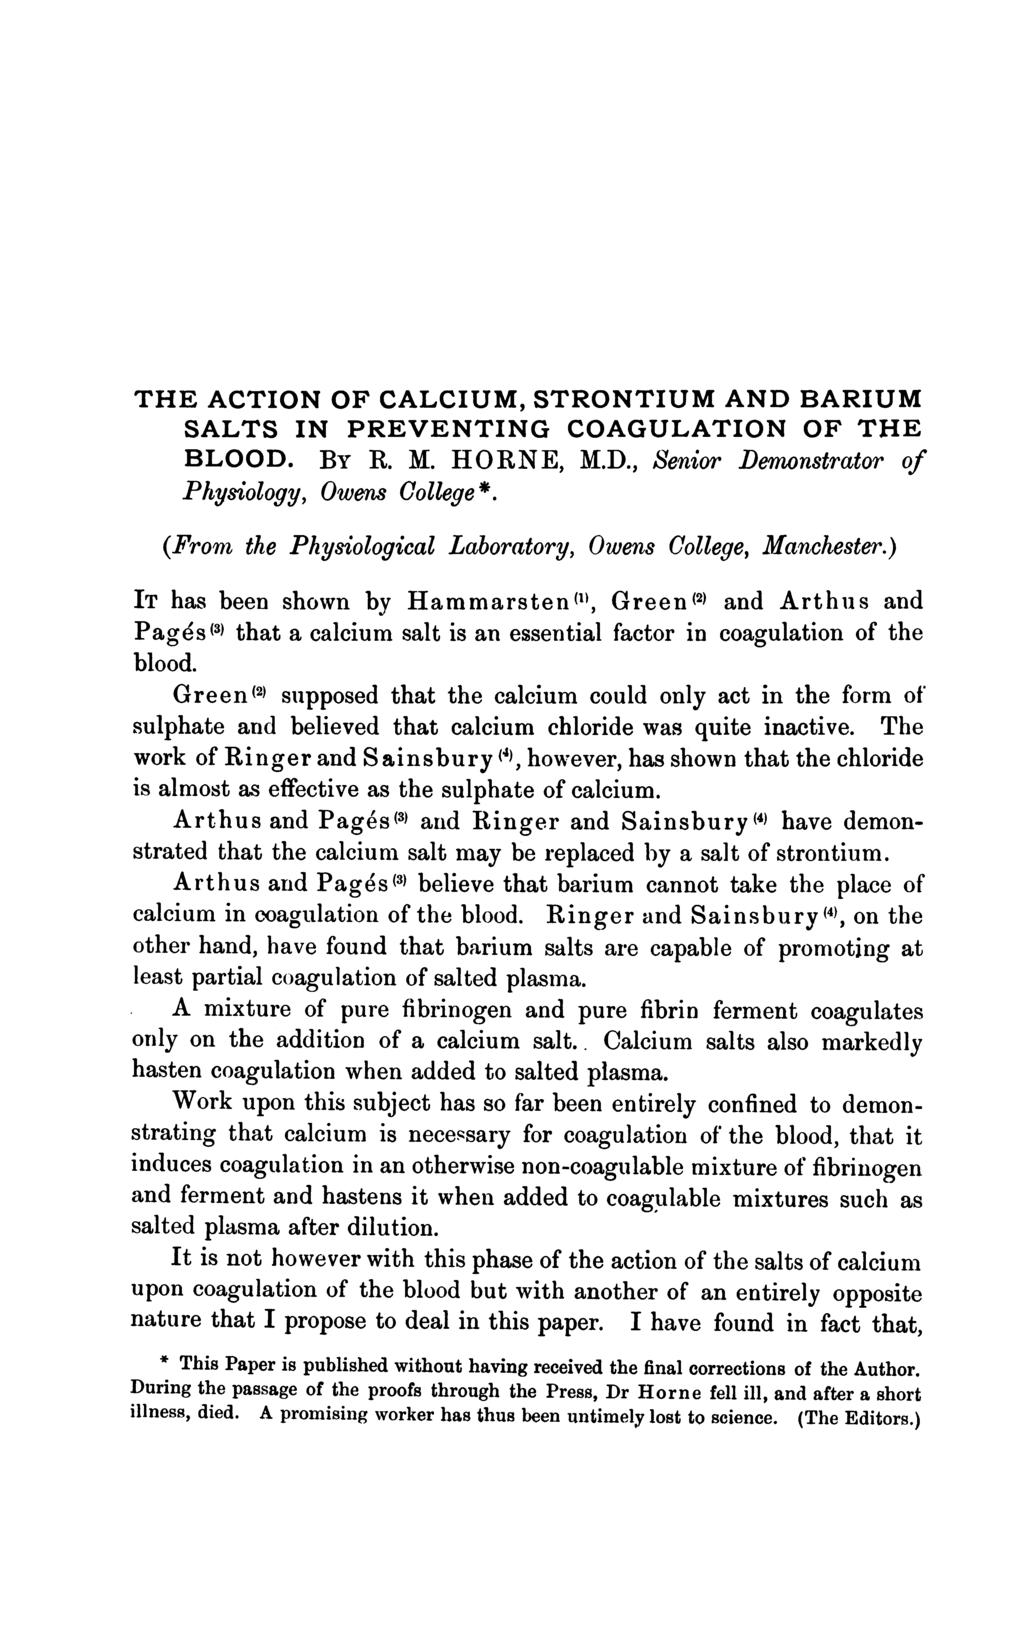 THE ACTION OF CALCIUM, STRONTIUM AND BARIUM SALTS IN PREVENTING COAGULATION OF THE BLOOD. BY R. M. HORNE, M.D., Senior Denonstrator of Physiology, Owens College *.